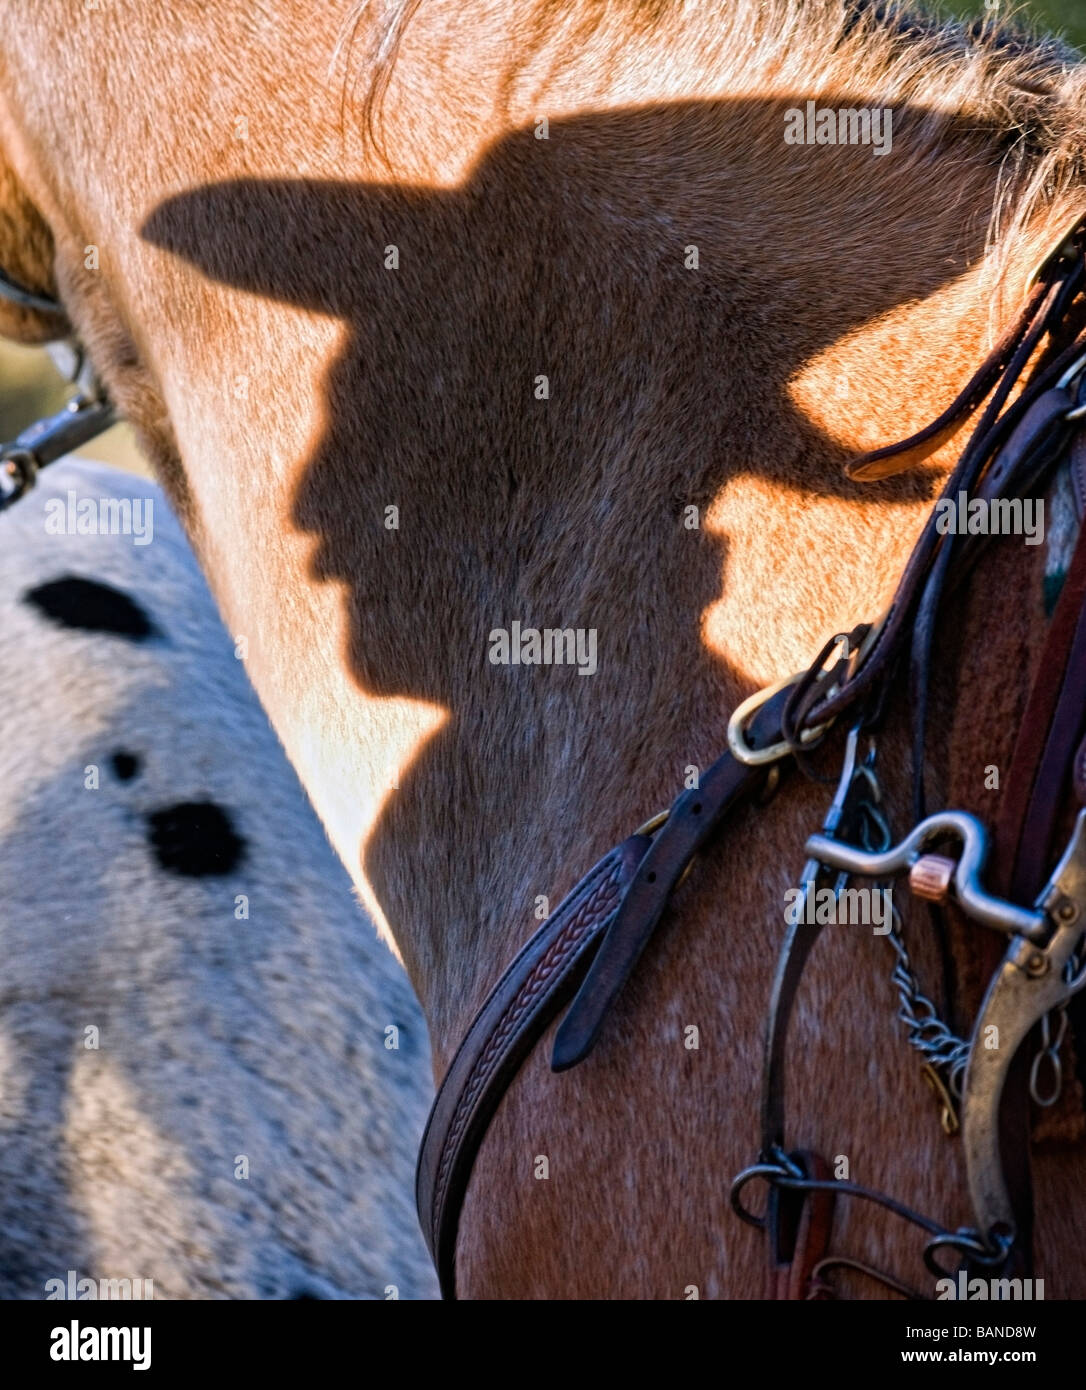 Shadow of a cowboy on a horse Stock Photo